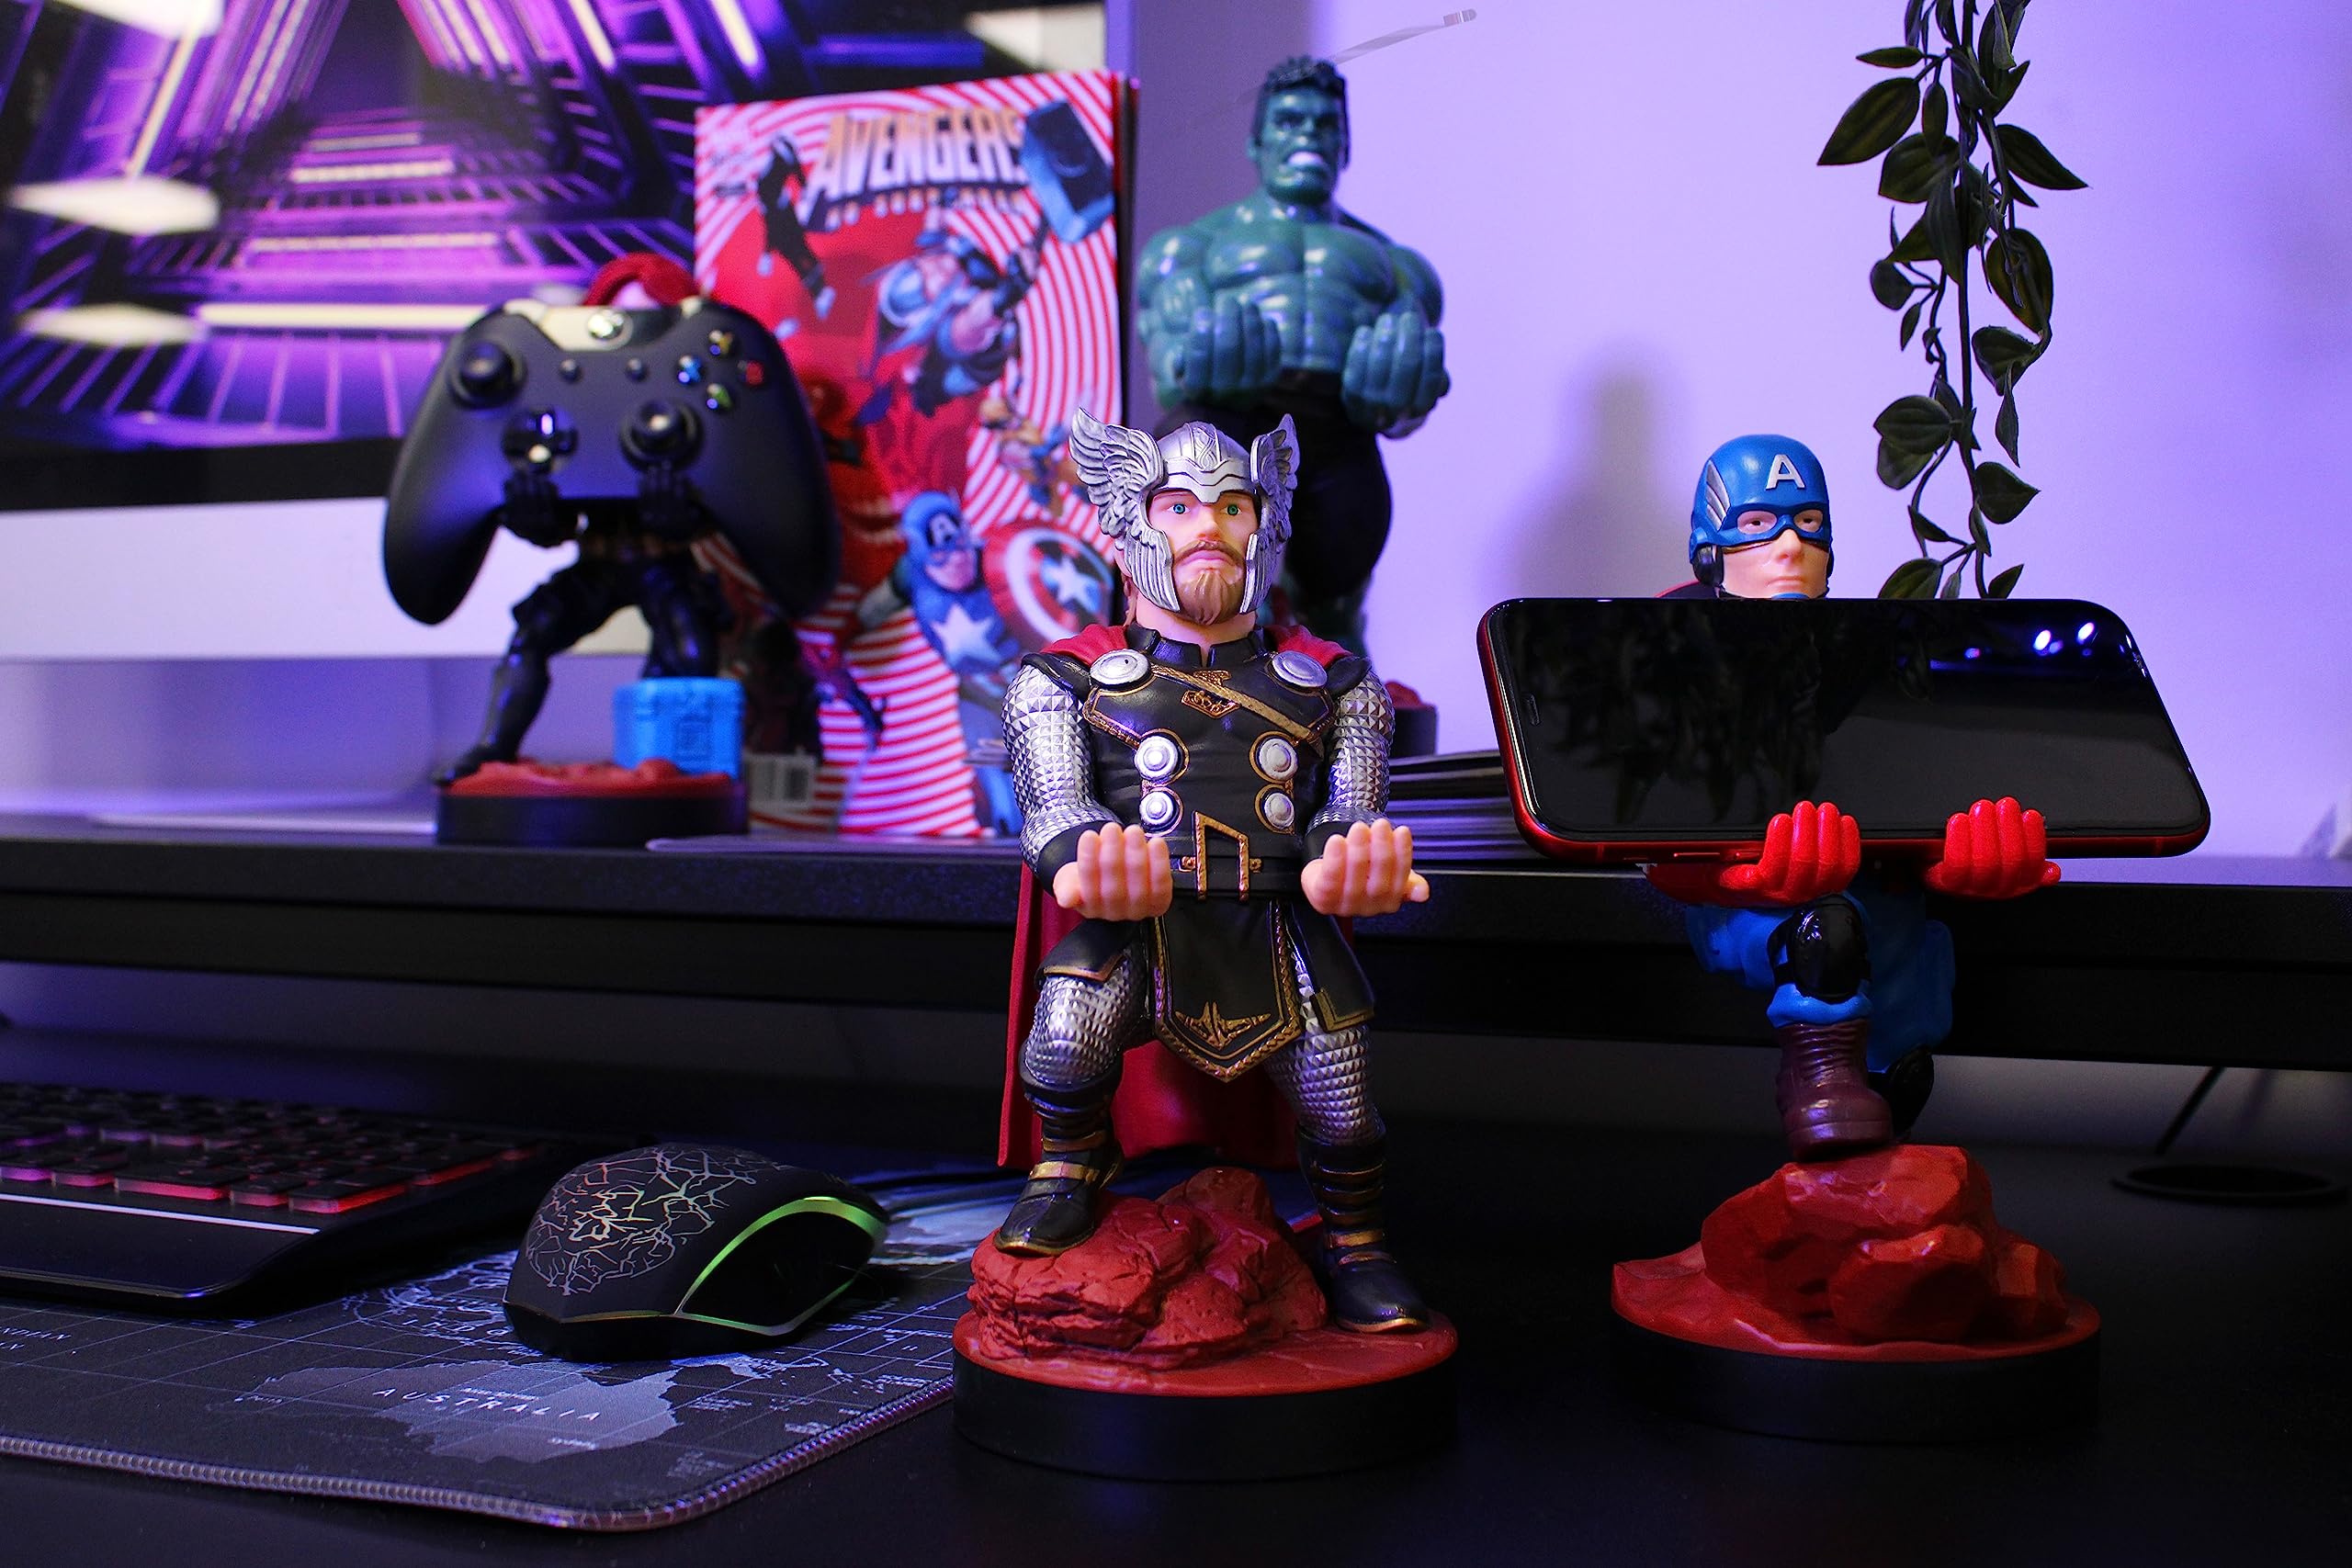 Cable Guys, Marvels Avengers The Incredible Hulk Controller Holder